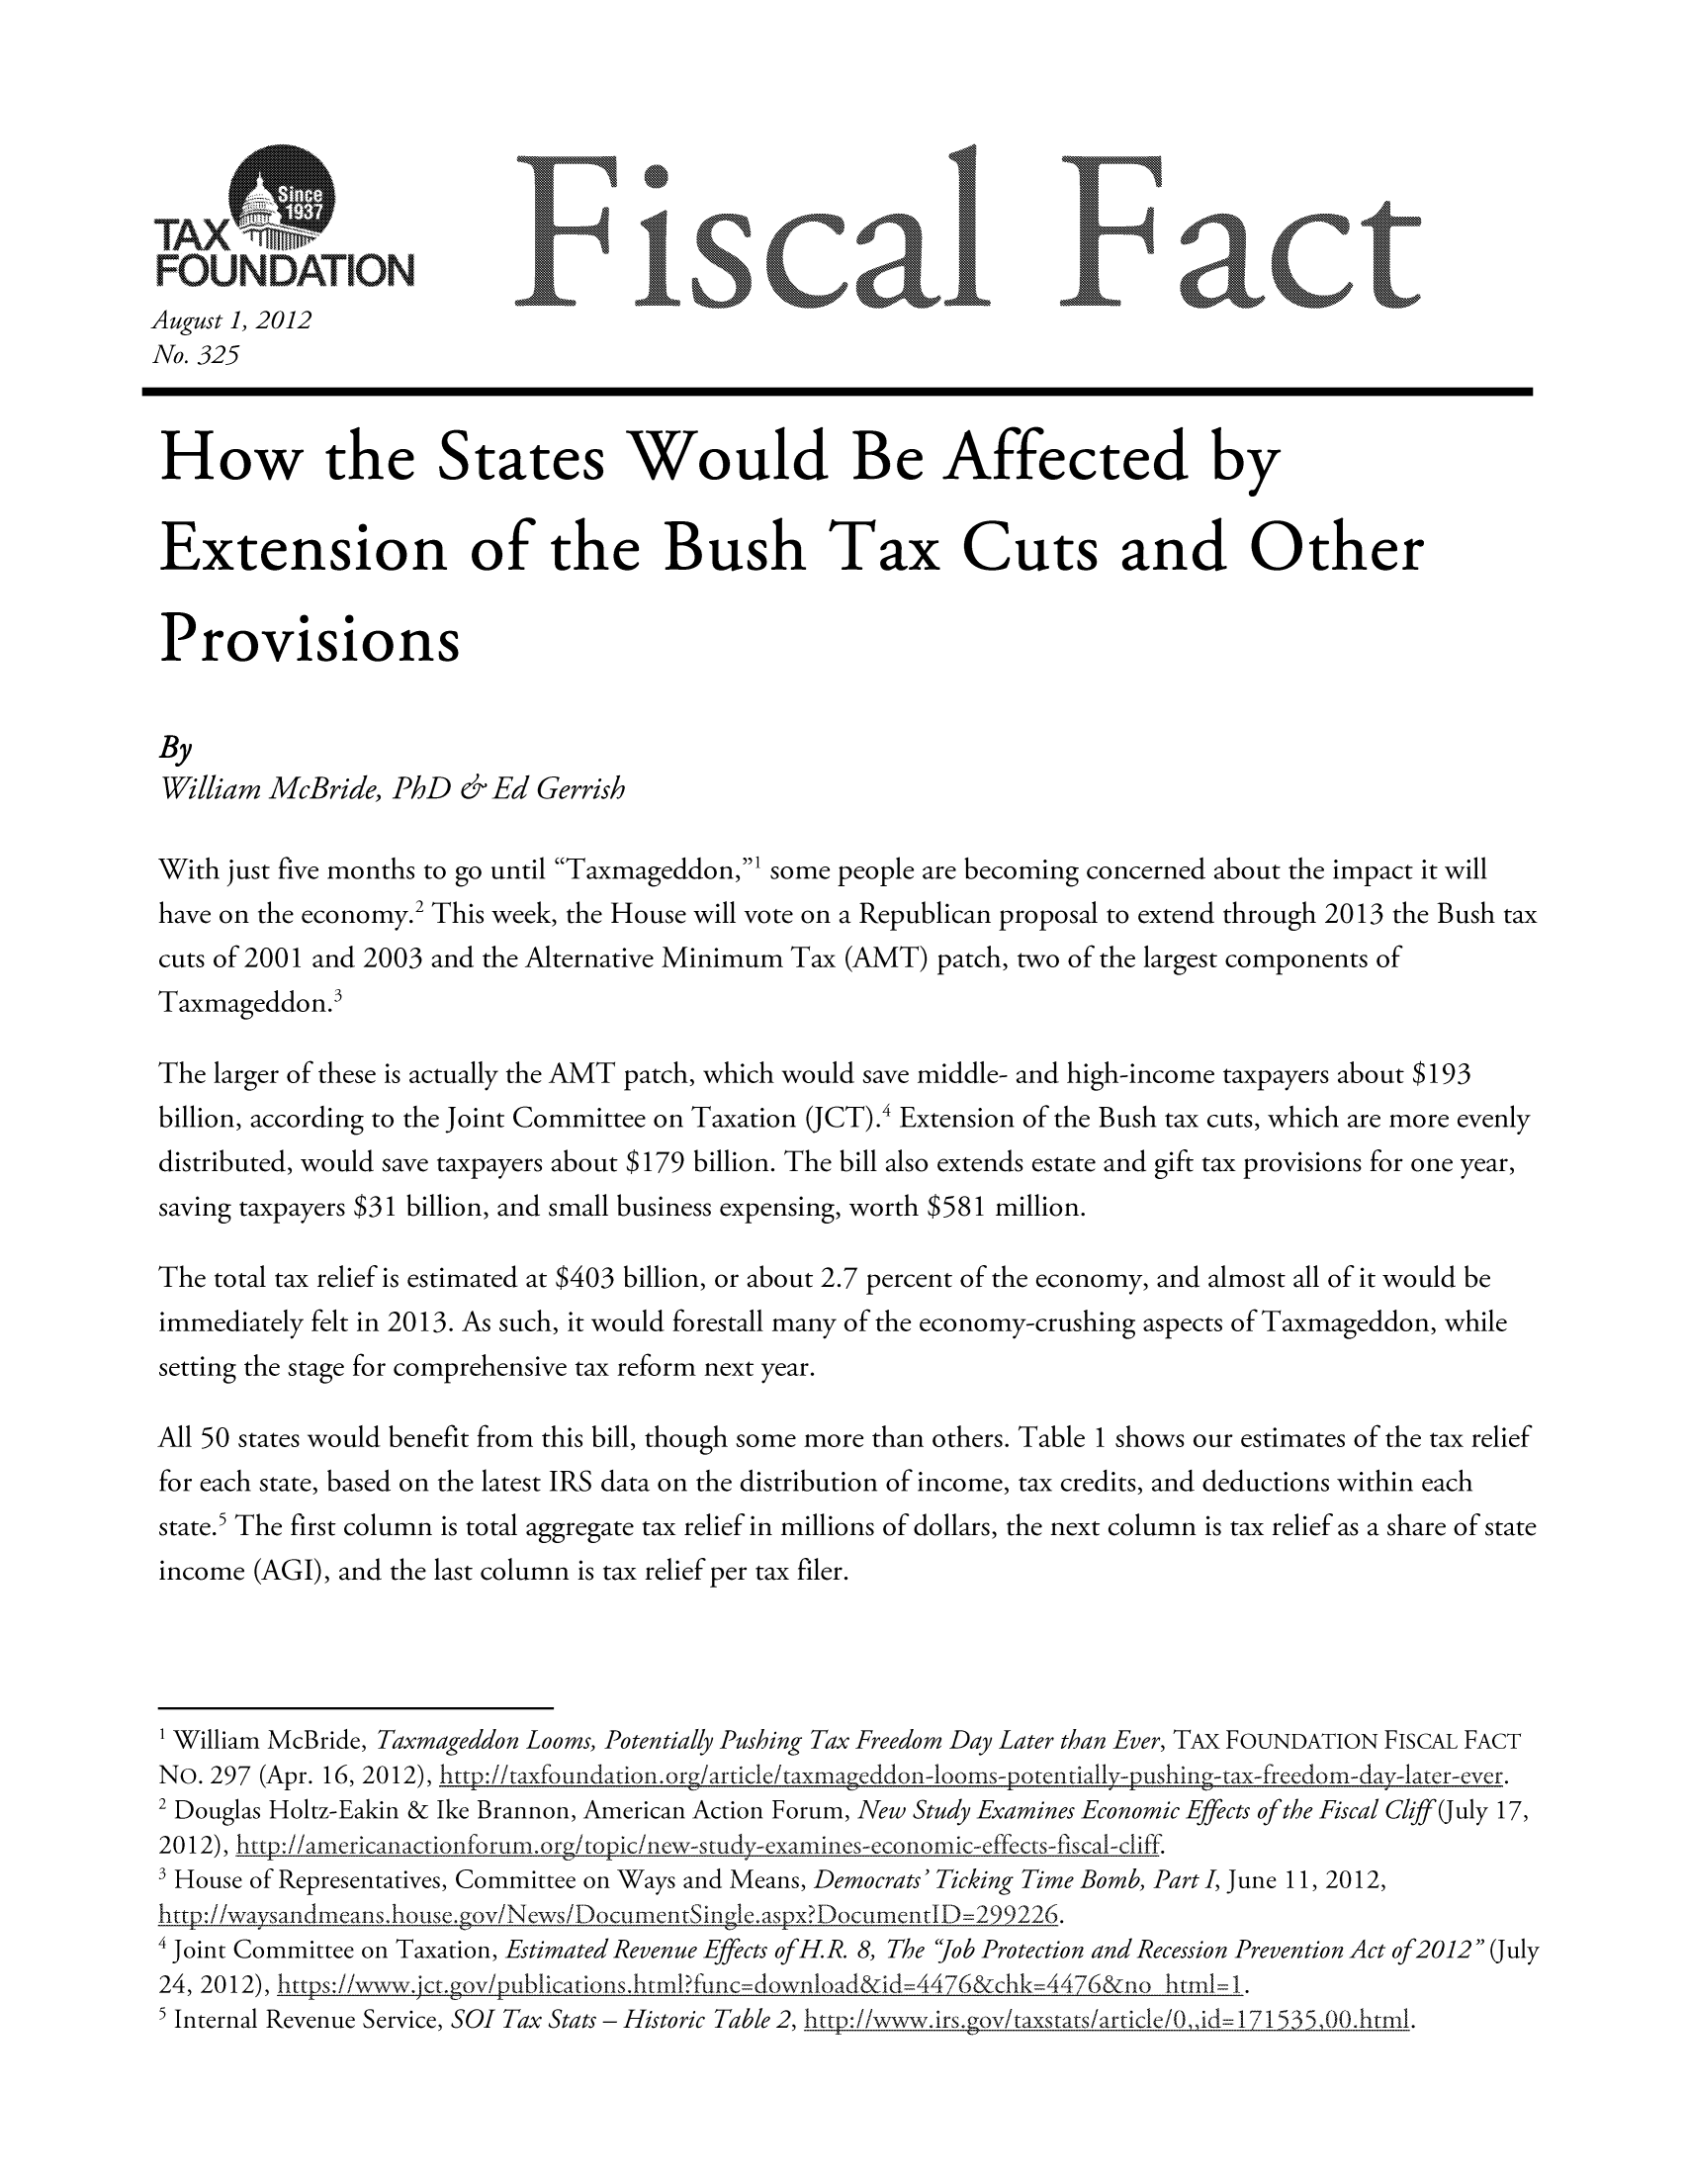 handle is hein.taxfoundation/ffdcfxz0001 and id is 1 raw text is: TAX 
FUDAT UN                                               °
August 1, 2012
No. 325
How the States Would Be Affected by
Extension of the Bush Tax Cuts and Other
Provisions
By
William McBride, PhD & Ed Gerrish
With just five months to go until Taxmageddon,' some people are becoming concerned about the impact it will
have on the economy.2 This week, the House will vote on a Republican proposal to extend through 2013 the Bush tax
cuts of 2001 and 2003 and the Alternative Minimum Tax (AMT) patch, two of the largest components of
Taxmageddon.3
The larger of these is actually the AMT patch, which would save middle- and high-income taxpayers about $193
billion, according to the Joint Committee on Taxation JCT).4 Extension of the Bush tax cuts, which are more evenly
distributed, would save taxpayers about $179 billion. The bill also extends estate and gift tax provisions for one year,
saving taxpayers $31 billion, and small business expensing, worth $581 million.
The total tax relief is estimated at $403 billion, or about 2.7 percent of the economy, and almost all of it would be
immediately felt in 2013. As such, it would forestall many of the economy-crushing aspects of Taxmageddon, while
setting the stage for comprehensive tax reform next year.
All 50 states would benefit from this bill, though some more than others. Table 1 shows our estimates of the tax relief
for each state, based on the latest IRS data on the distribution of income, tax credits, and deductions within each
state.5 The first column is total aggregate tax relief in millions of dollars, the next column is tax relief as a share of state
income (AGI), and the last column is tax relief per tax filer.
1 William McBride, Taxmageddon Looms, Potentially Pushing Tax Freedom Day Later than Ever, TAX FOUNDATION FISCAL FACT
NO. 297 (Apr. 16, 2012), h tvt:/taxfoundation.org/aruiclekaxmageddon-loms-pote*tiall -pushin1g-tax-freedom-day-la~er-ever.
2 Douglas Holtz-Eakin & Ike Brannon, American Action Forum, New Study Examines Economic Effects of the Fiscal/C/iff(July 17,
2012), http:!/americanactionforum.org/topic/ncw study cxamines-economic-effects-fiscal-cliff.
SHouse of Representatives, Committee on Ways and Means, Democrats' Ticking Time Bomb, Part I, June 11, 2012,
http:/iwaysandmea ns.housecgov/Ncws/DocumentSingle. aspx? Document1lD=299226.
4 Joint Committee on Taxation, Estimated Revenue Effects ofH.R. 8, The job Protection and Recession Prevention Act of 2012 (July

24, 2012), https:/www.jct.gov/publications.html?finc=download&id=4476&chk=476&no html= 1.
5 Internal Revenue Service, SOI Tax Stats- Historic Table 2, http://www.irs.govtaxstatsIarticle/O,,id=IZ I535,00.litml.


